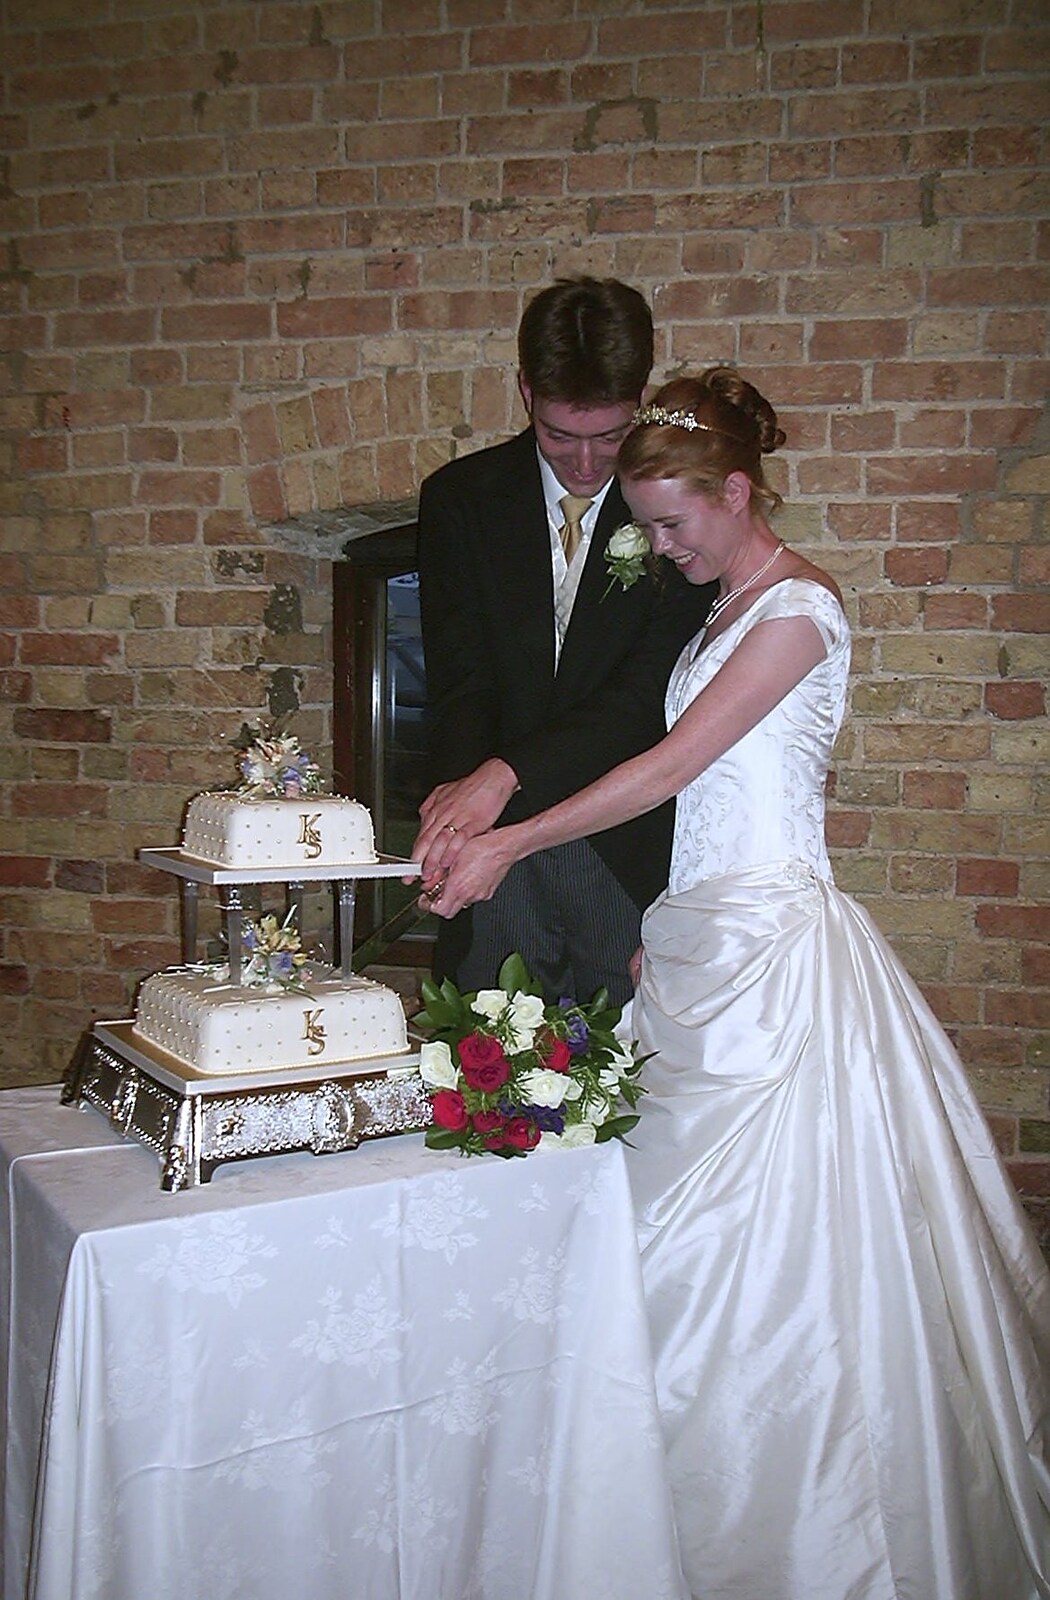 Stef and Kath's 3G Lab Wedding, Ely, Cambridgeshire - 28th July 2001: Stef and Kath cut the cake